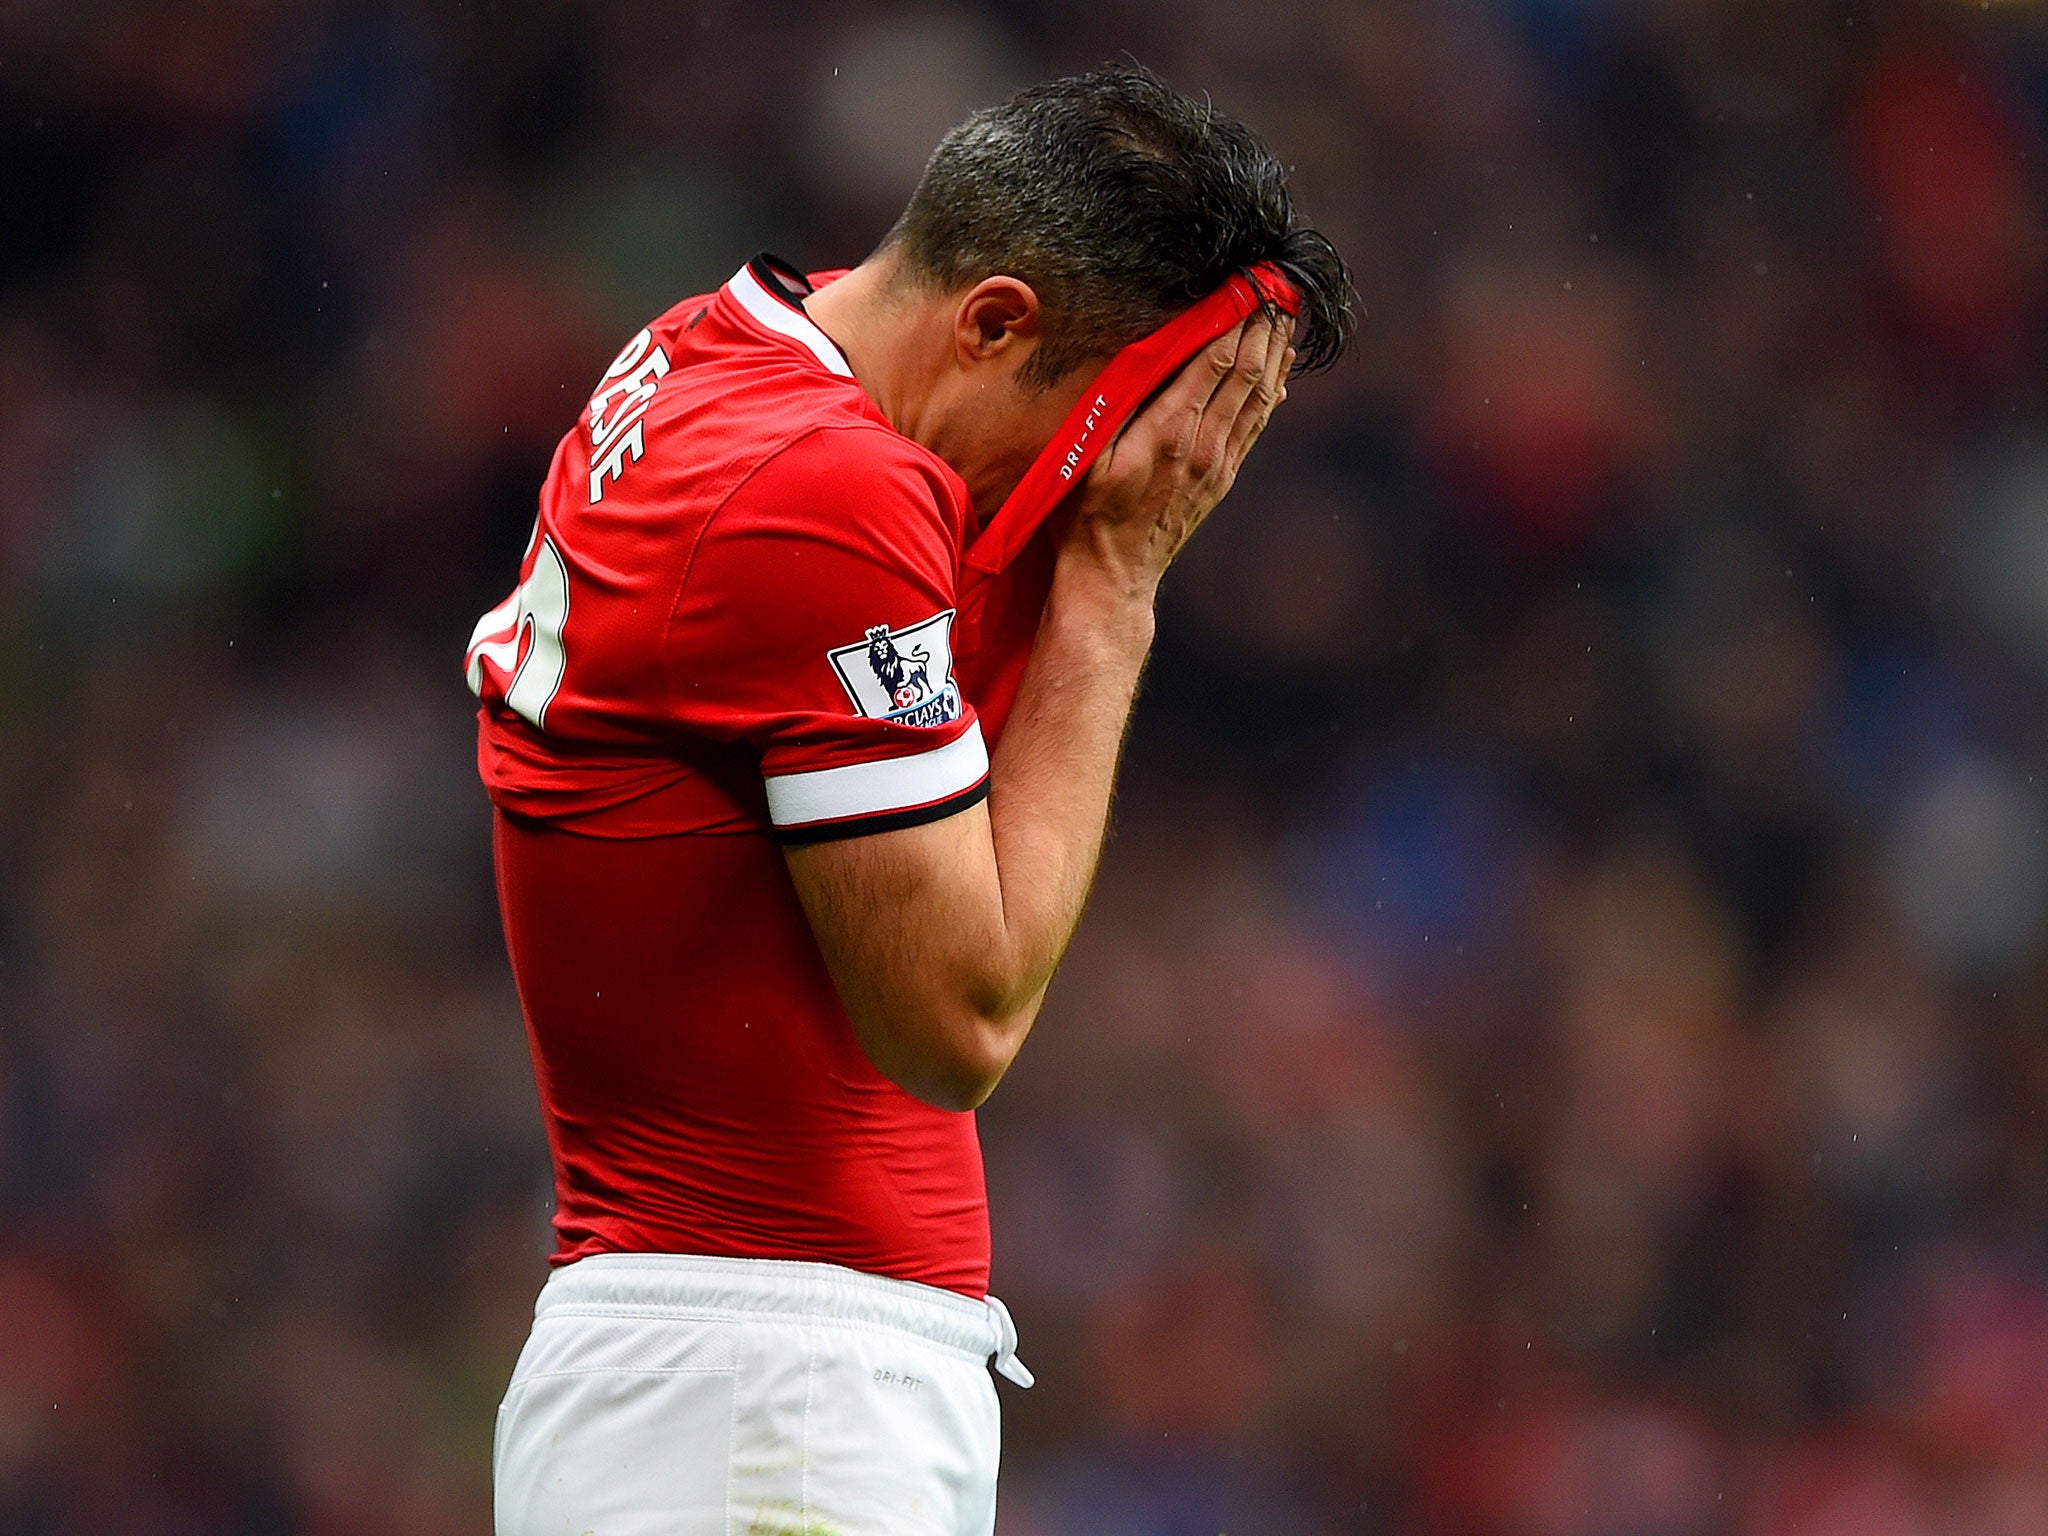 Robin van Persie reacts after his penalty is saved